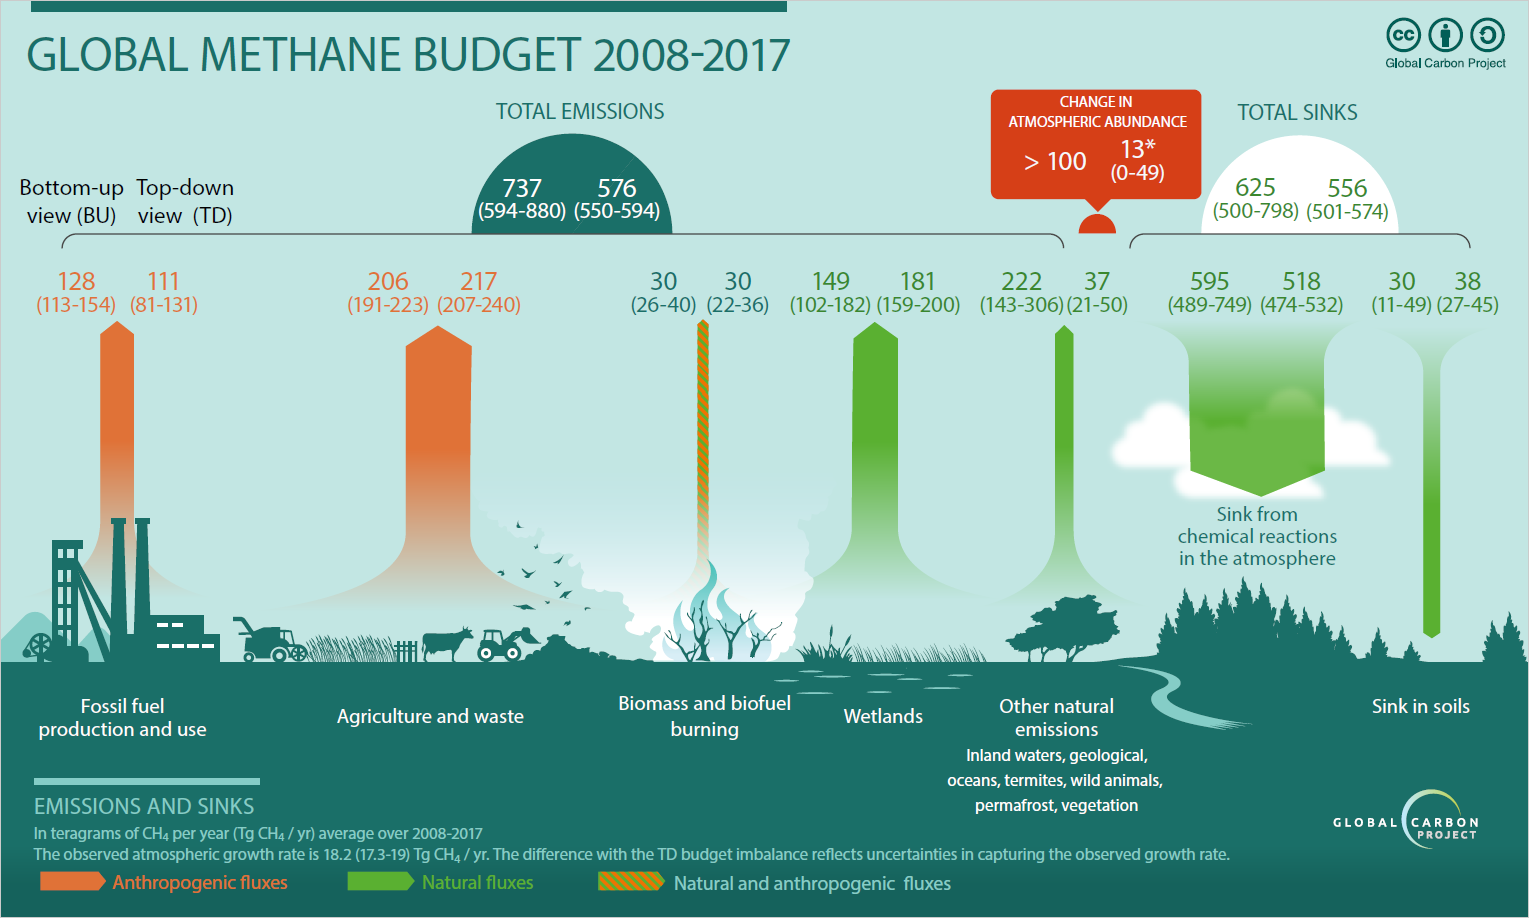 Graphic of the global methane budget from 2008 to 2017: The chart shows how total emissions are broken down by source, the majority coming from agriculture and waste and, to a lesser degree, fossil fuel production and use, wetlands, and biomass burning. The carbon sinks listed are forests and soils.